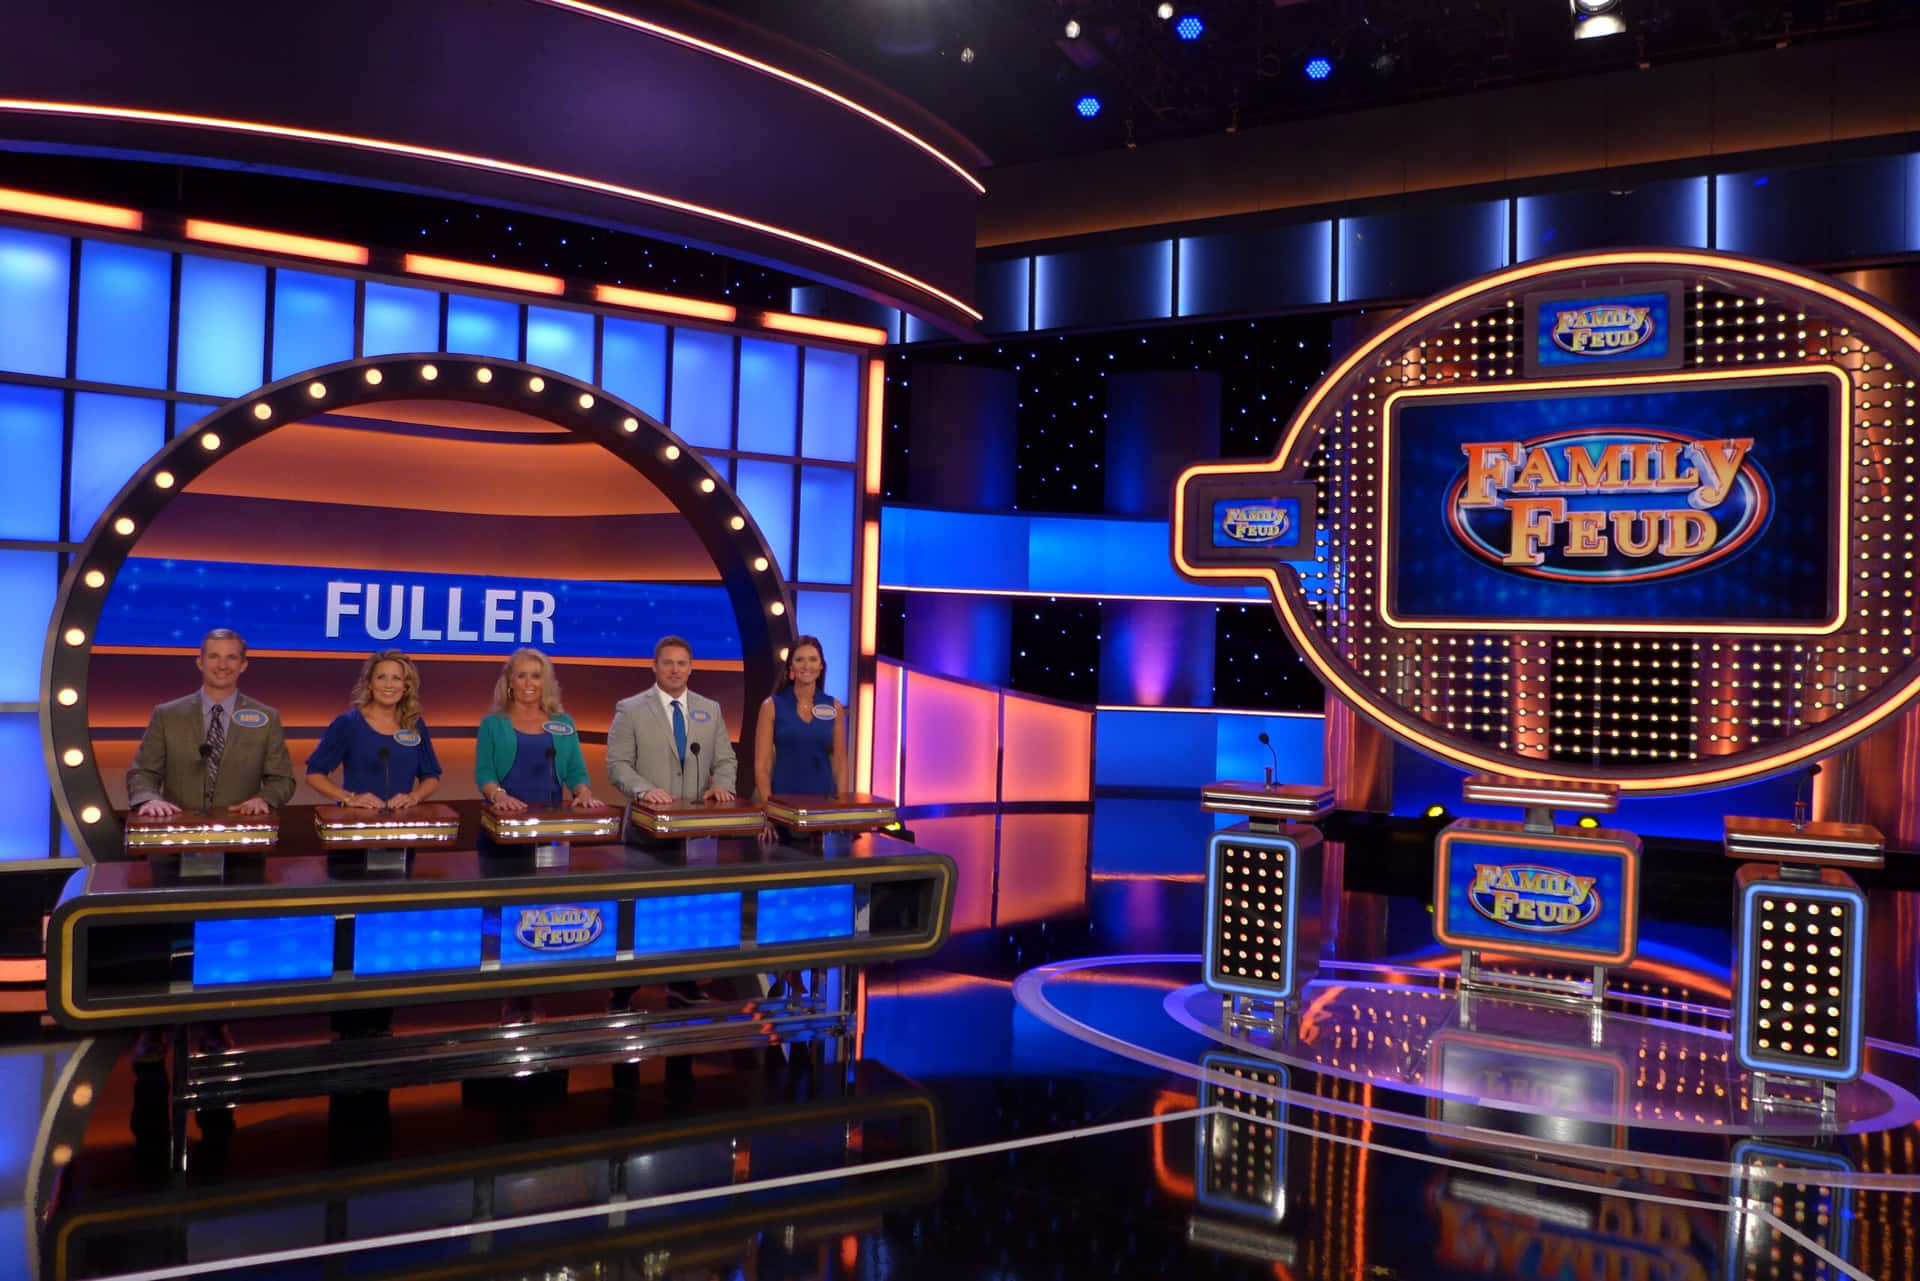 Team up with your family and join the competition of Family Feud